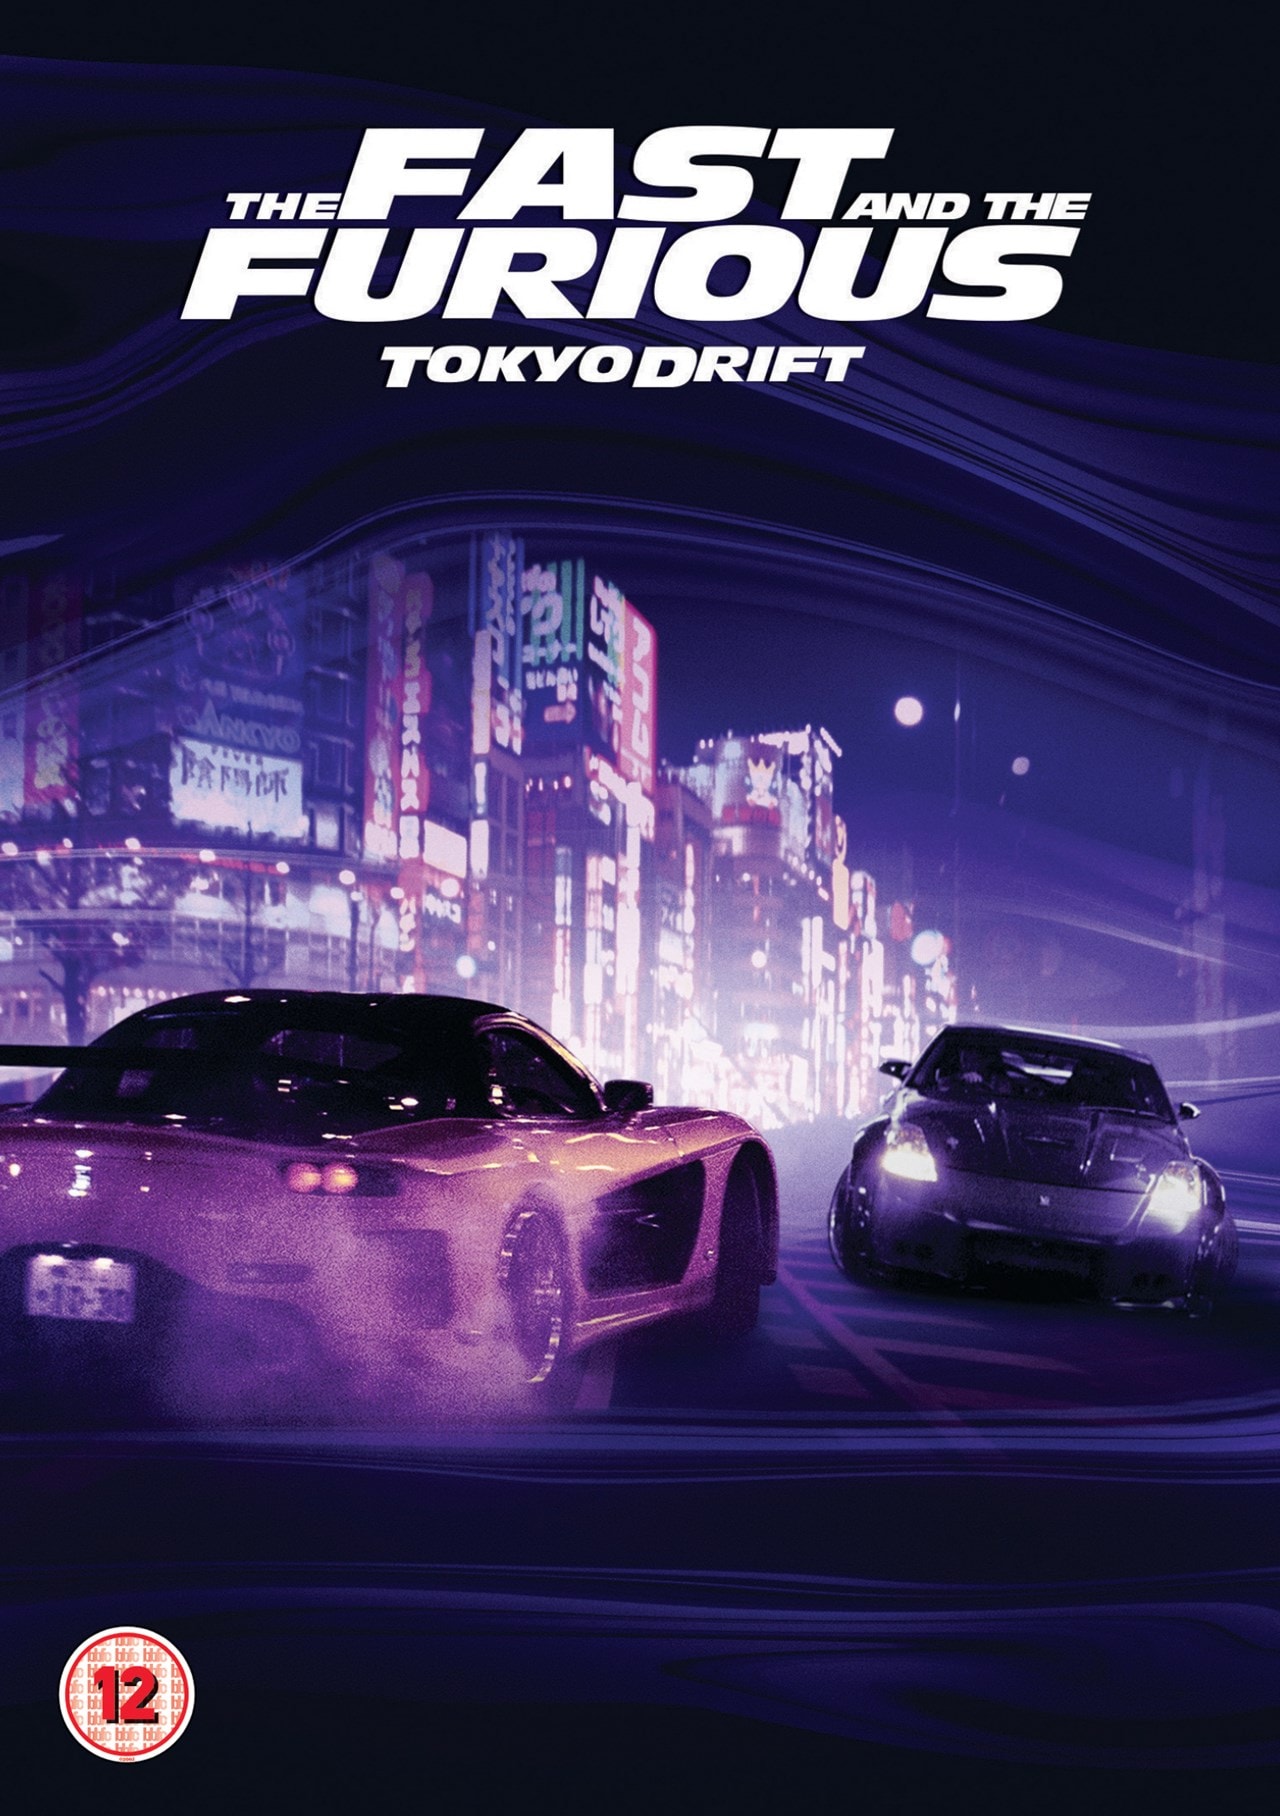 The Fast And The Furious Tokyo Drift Dvd Free Shipping Over 20